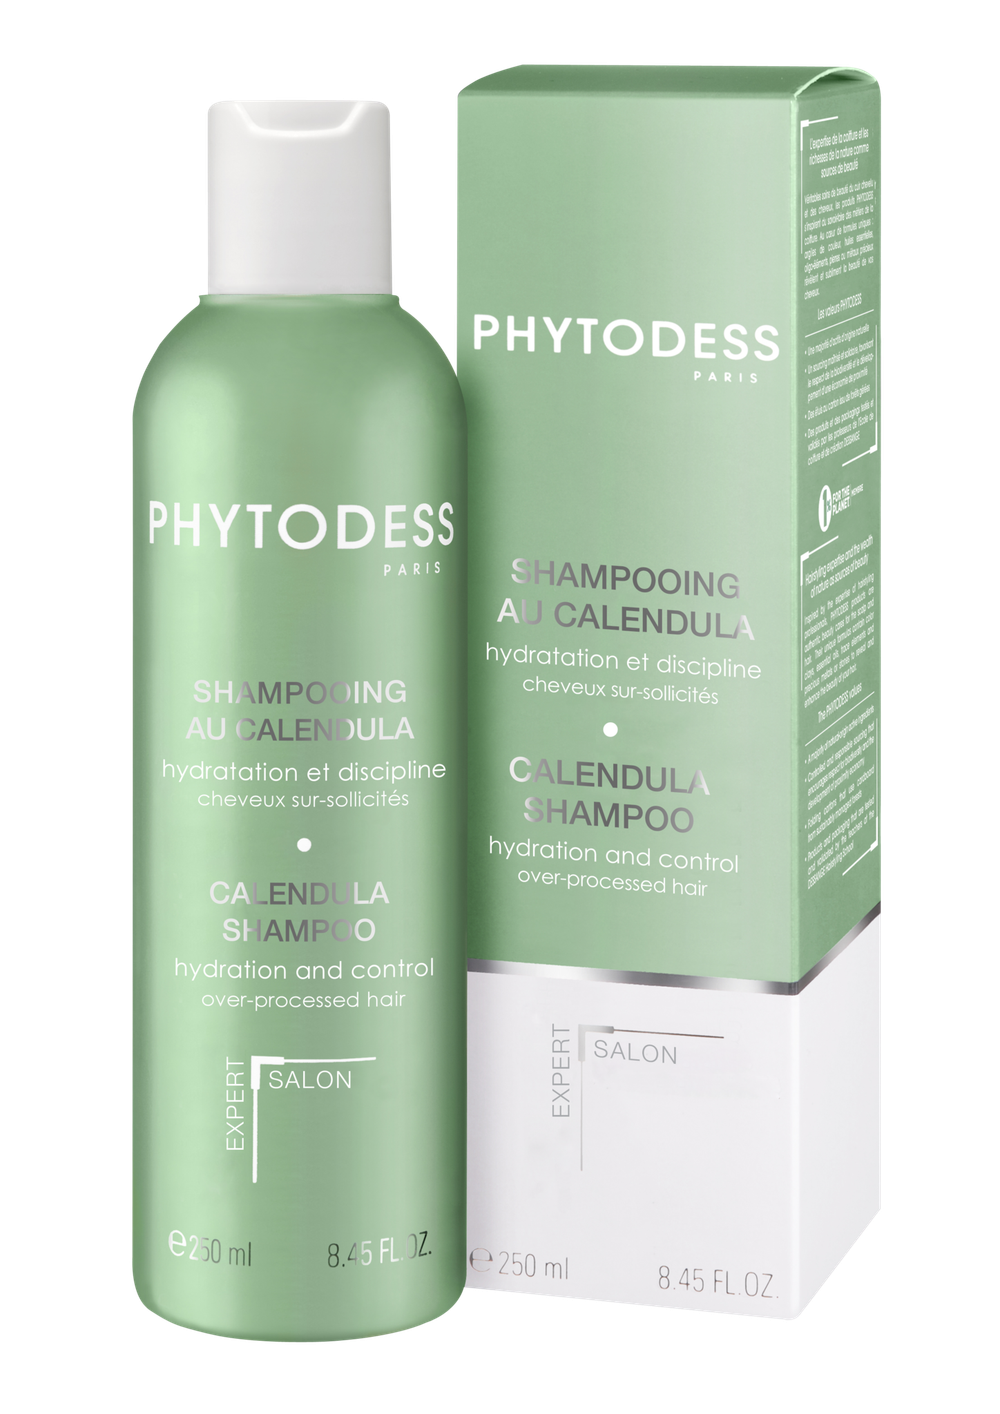 PHYTODESS SHAMPOING A L'HUILE D'ANDIROBA